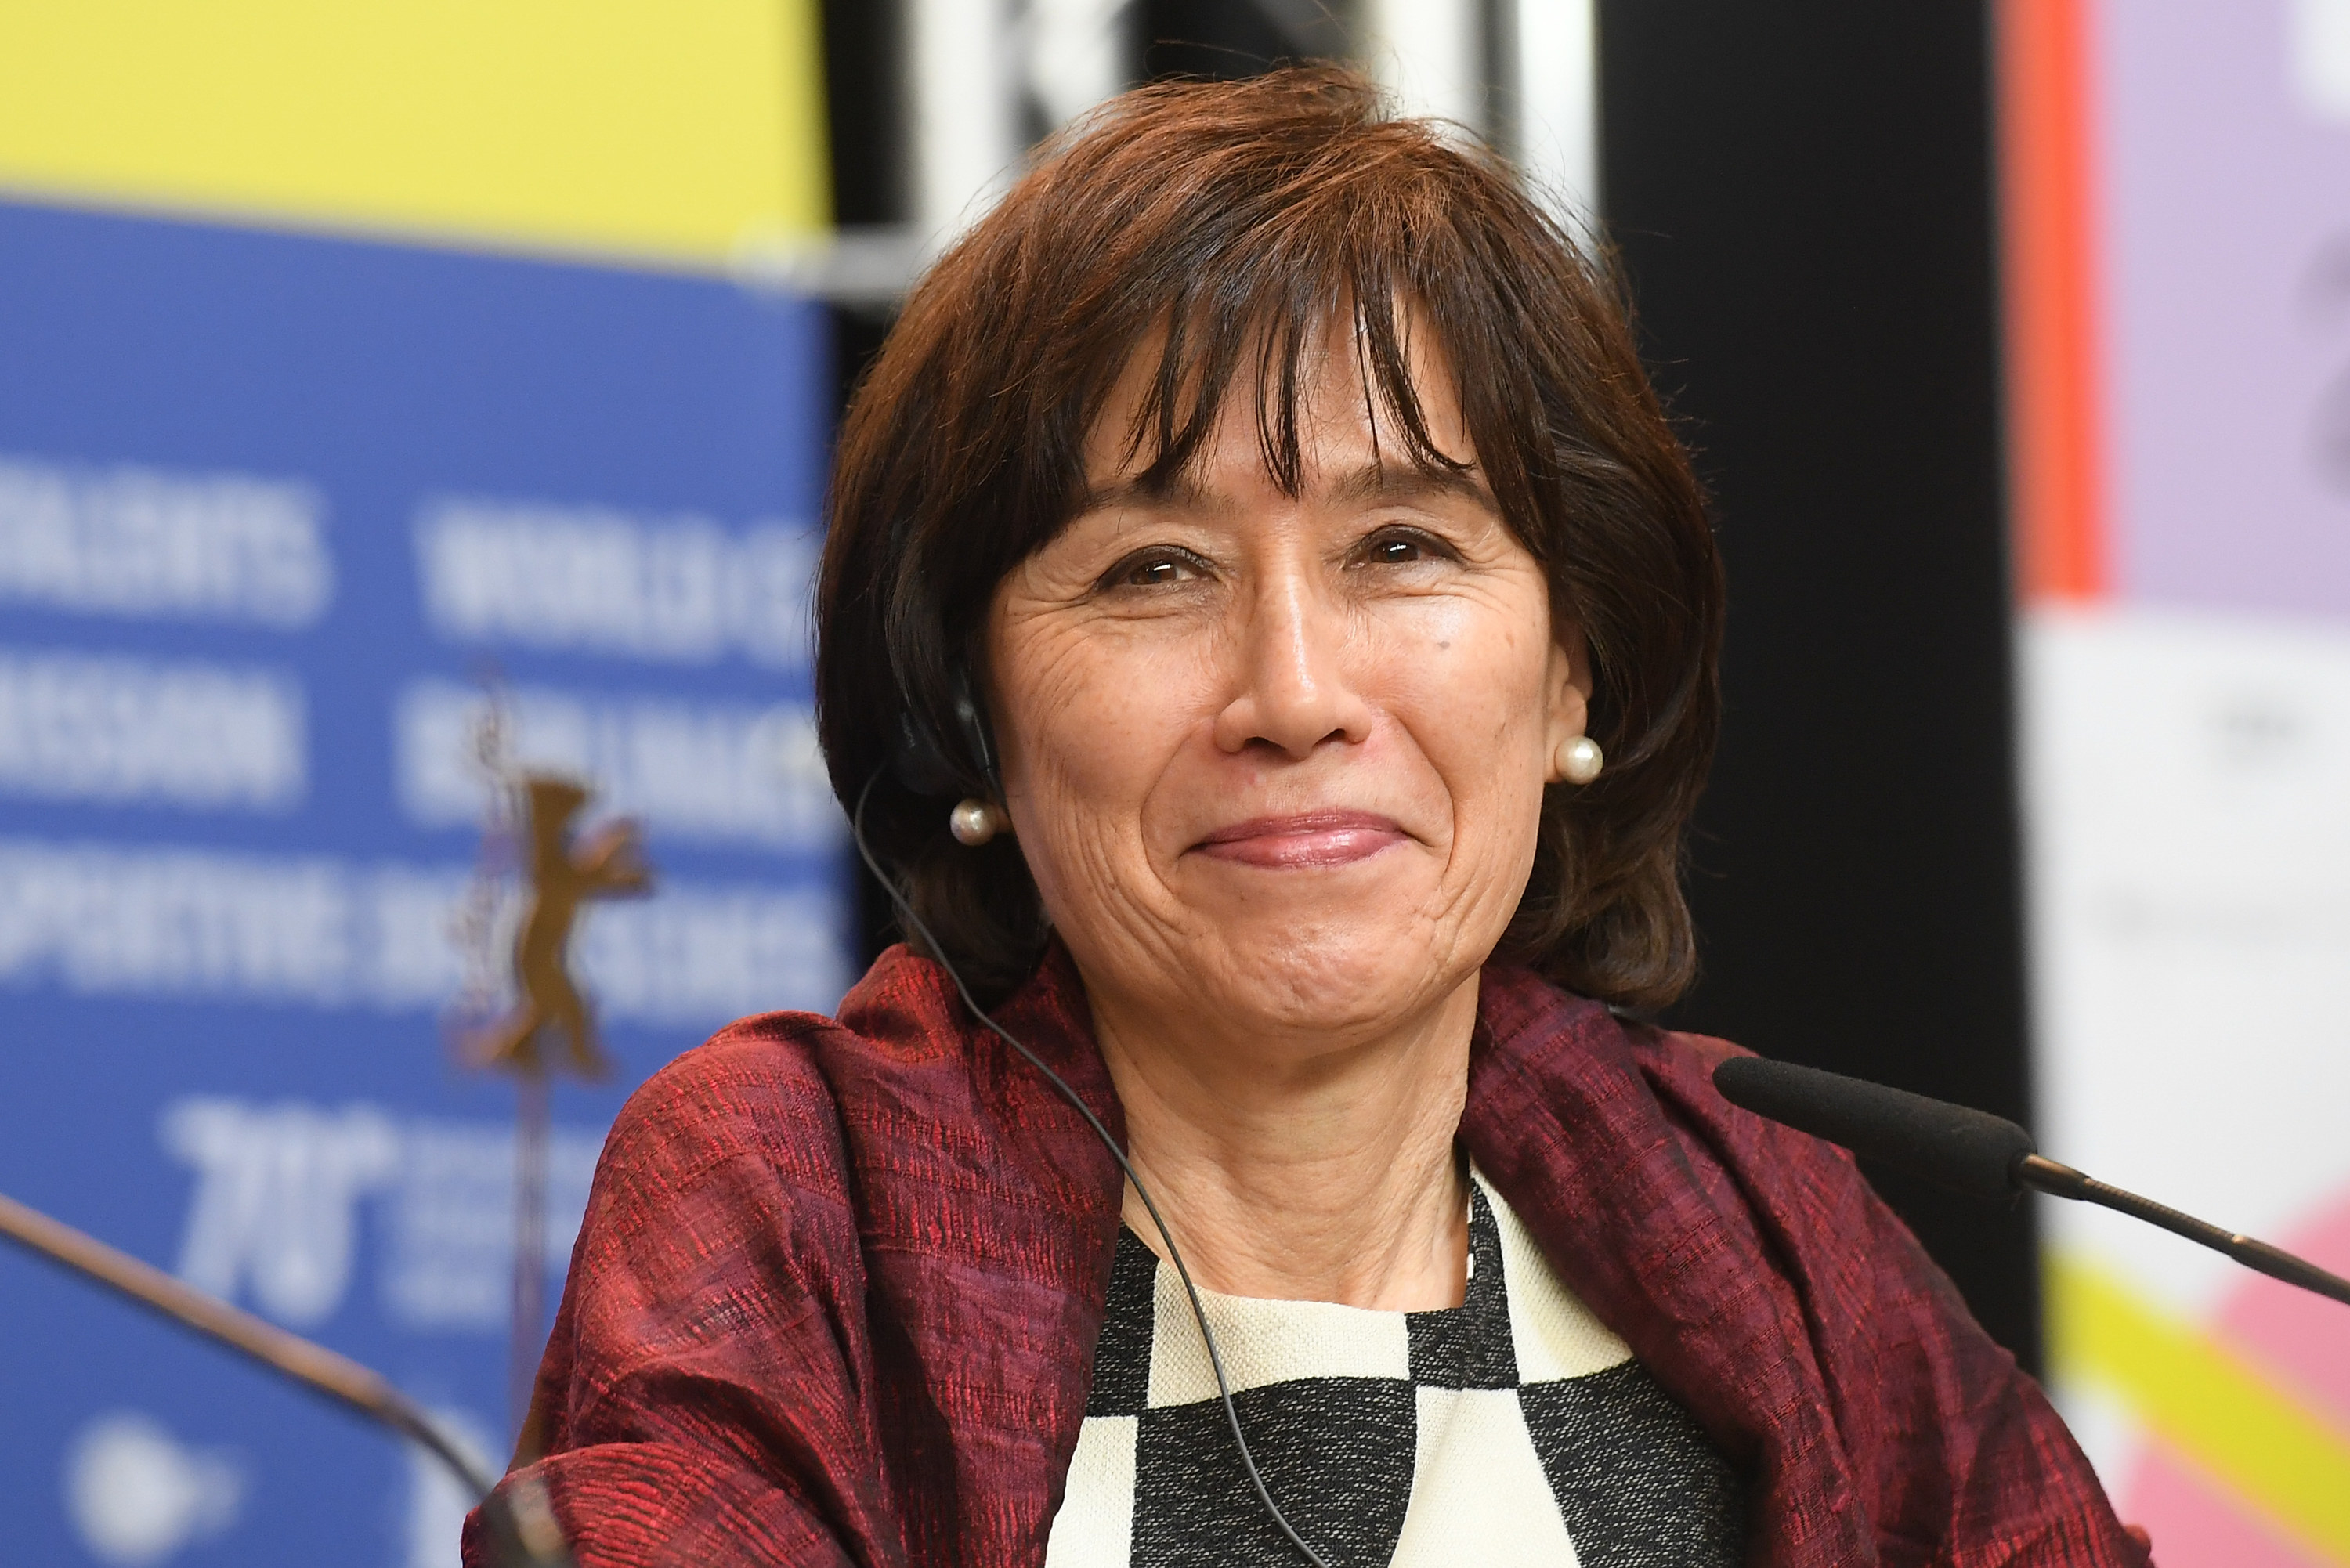 Aileen Mioko Smith sits at a press conference for &quot;Minamata&quot; during the Berlinale International Film Festival